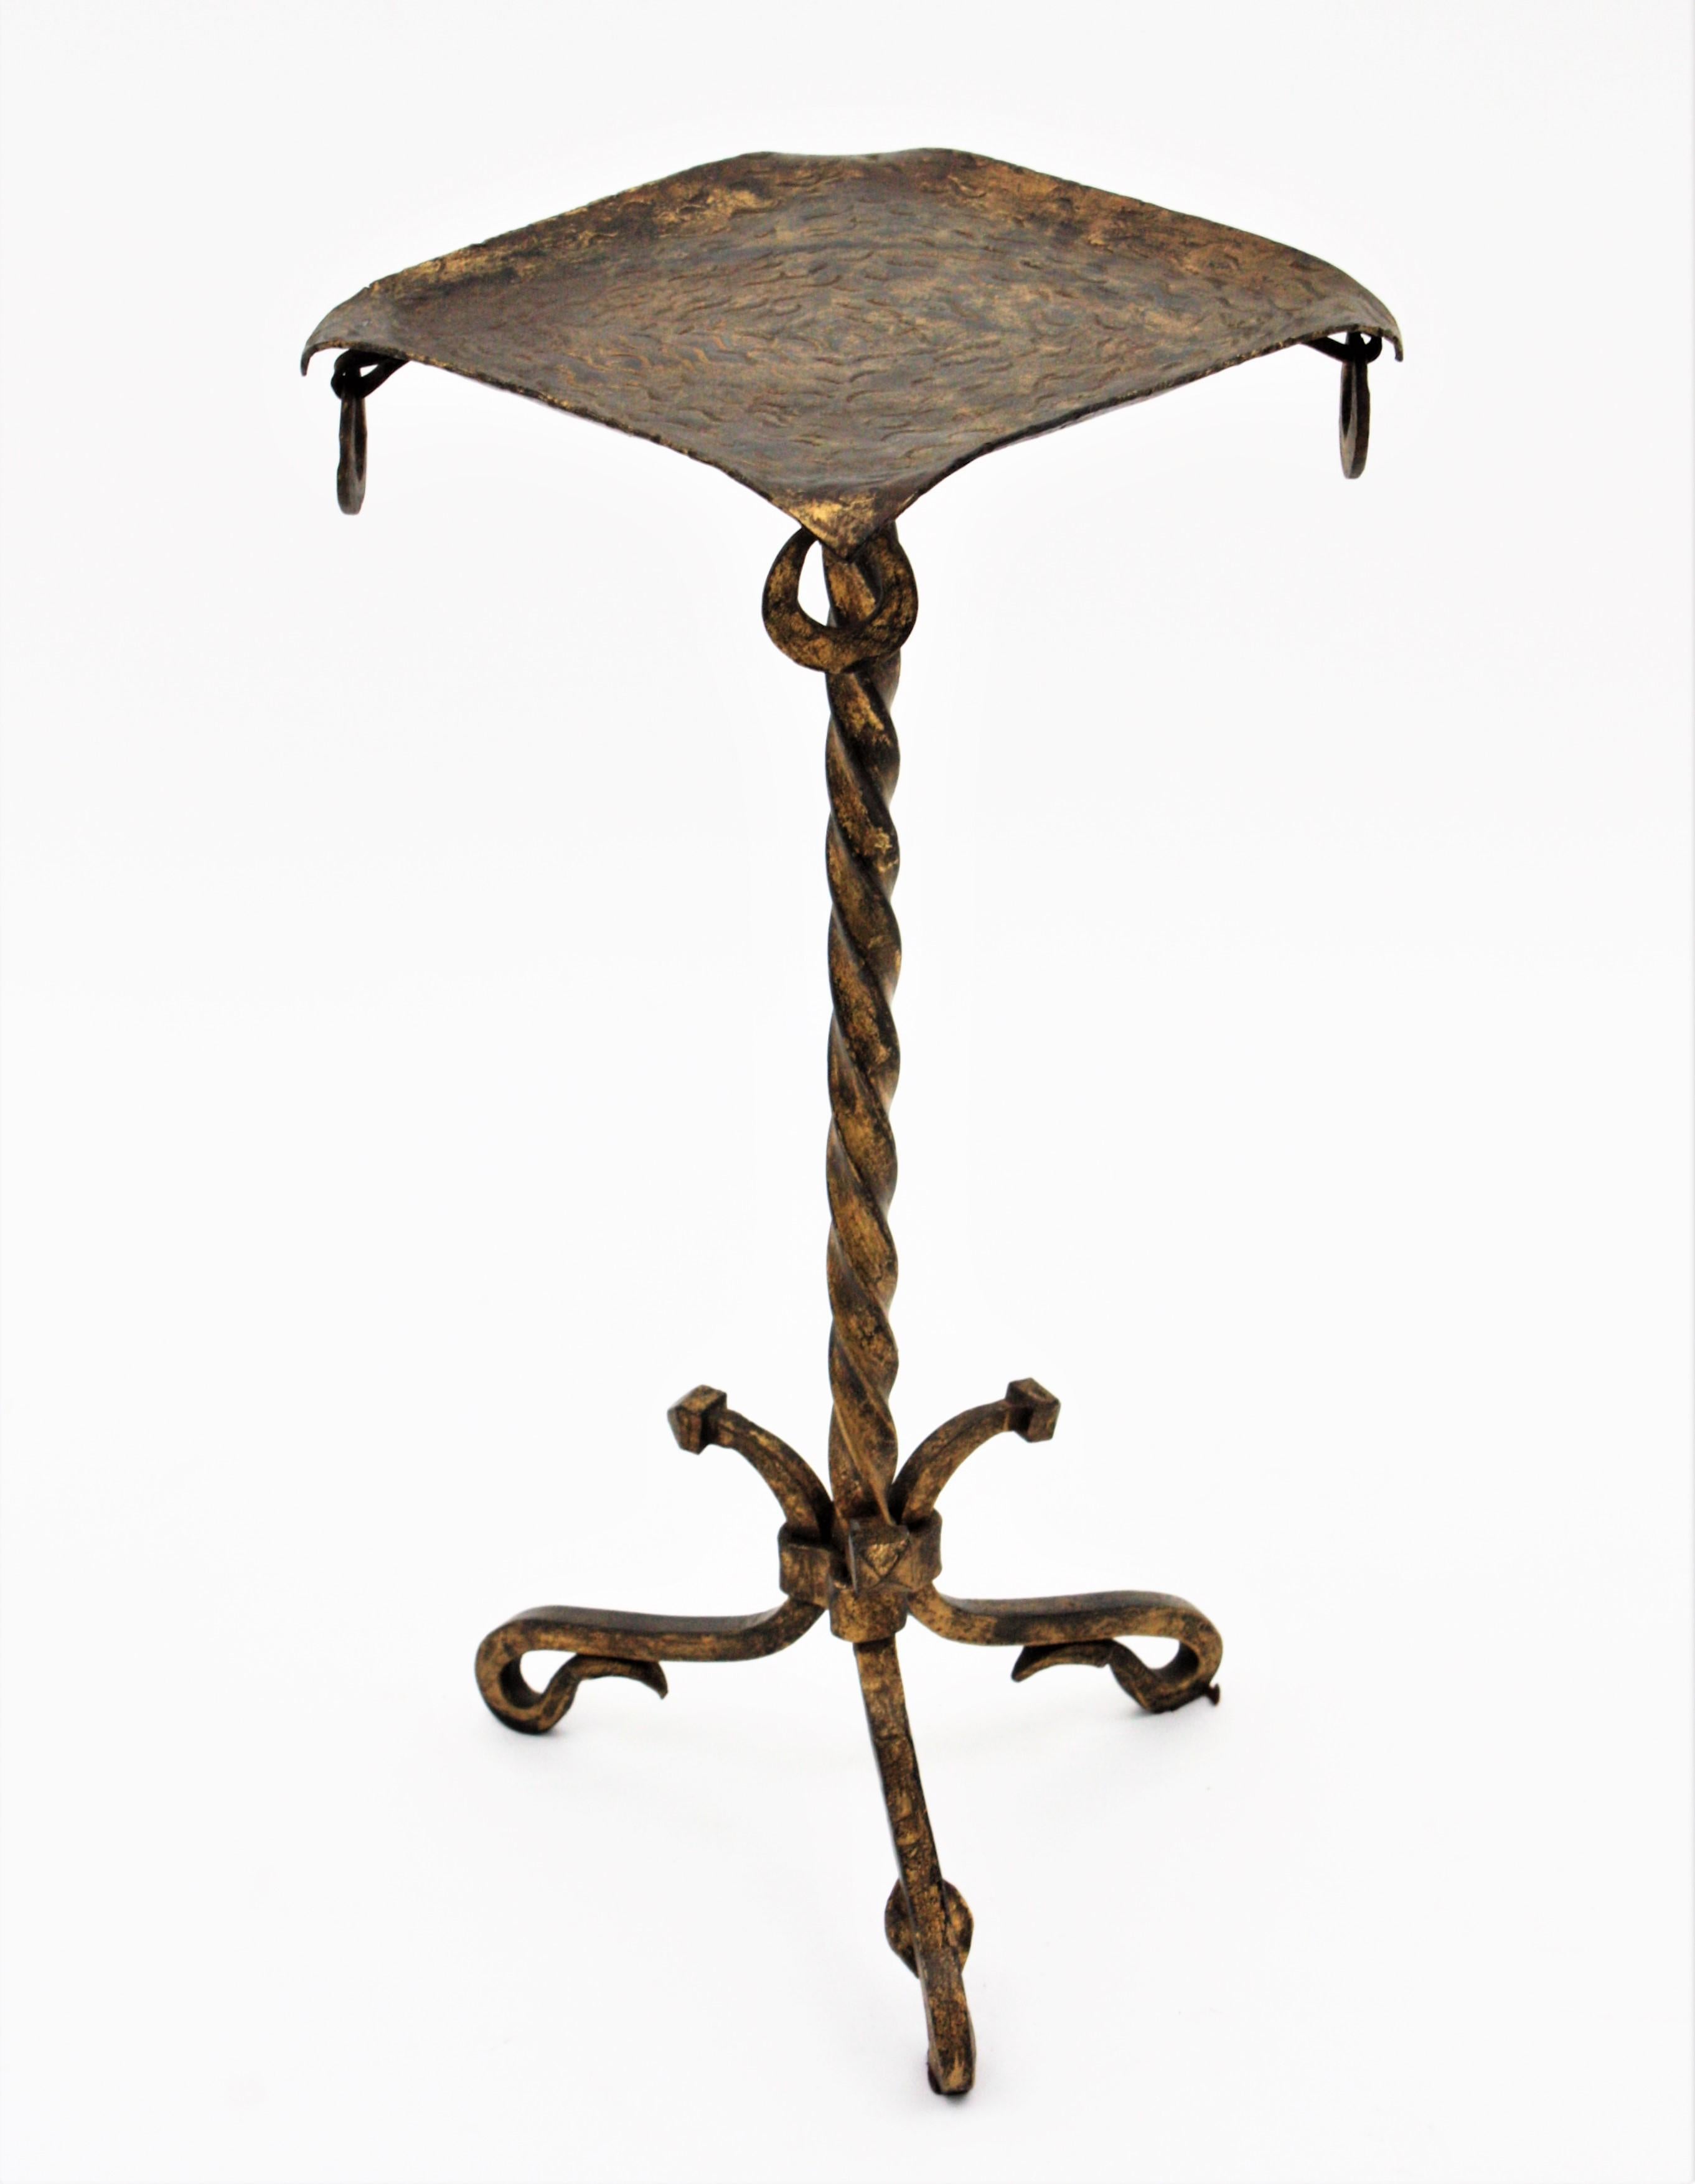 Eye-catching parcel-gilt hand forged side table twisting and ring detail. Spain, 1940s.
This beautiful Martini table features a rhombus top with ring details standing on a tripod base with twisting and scroll details. This table is entirely made by